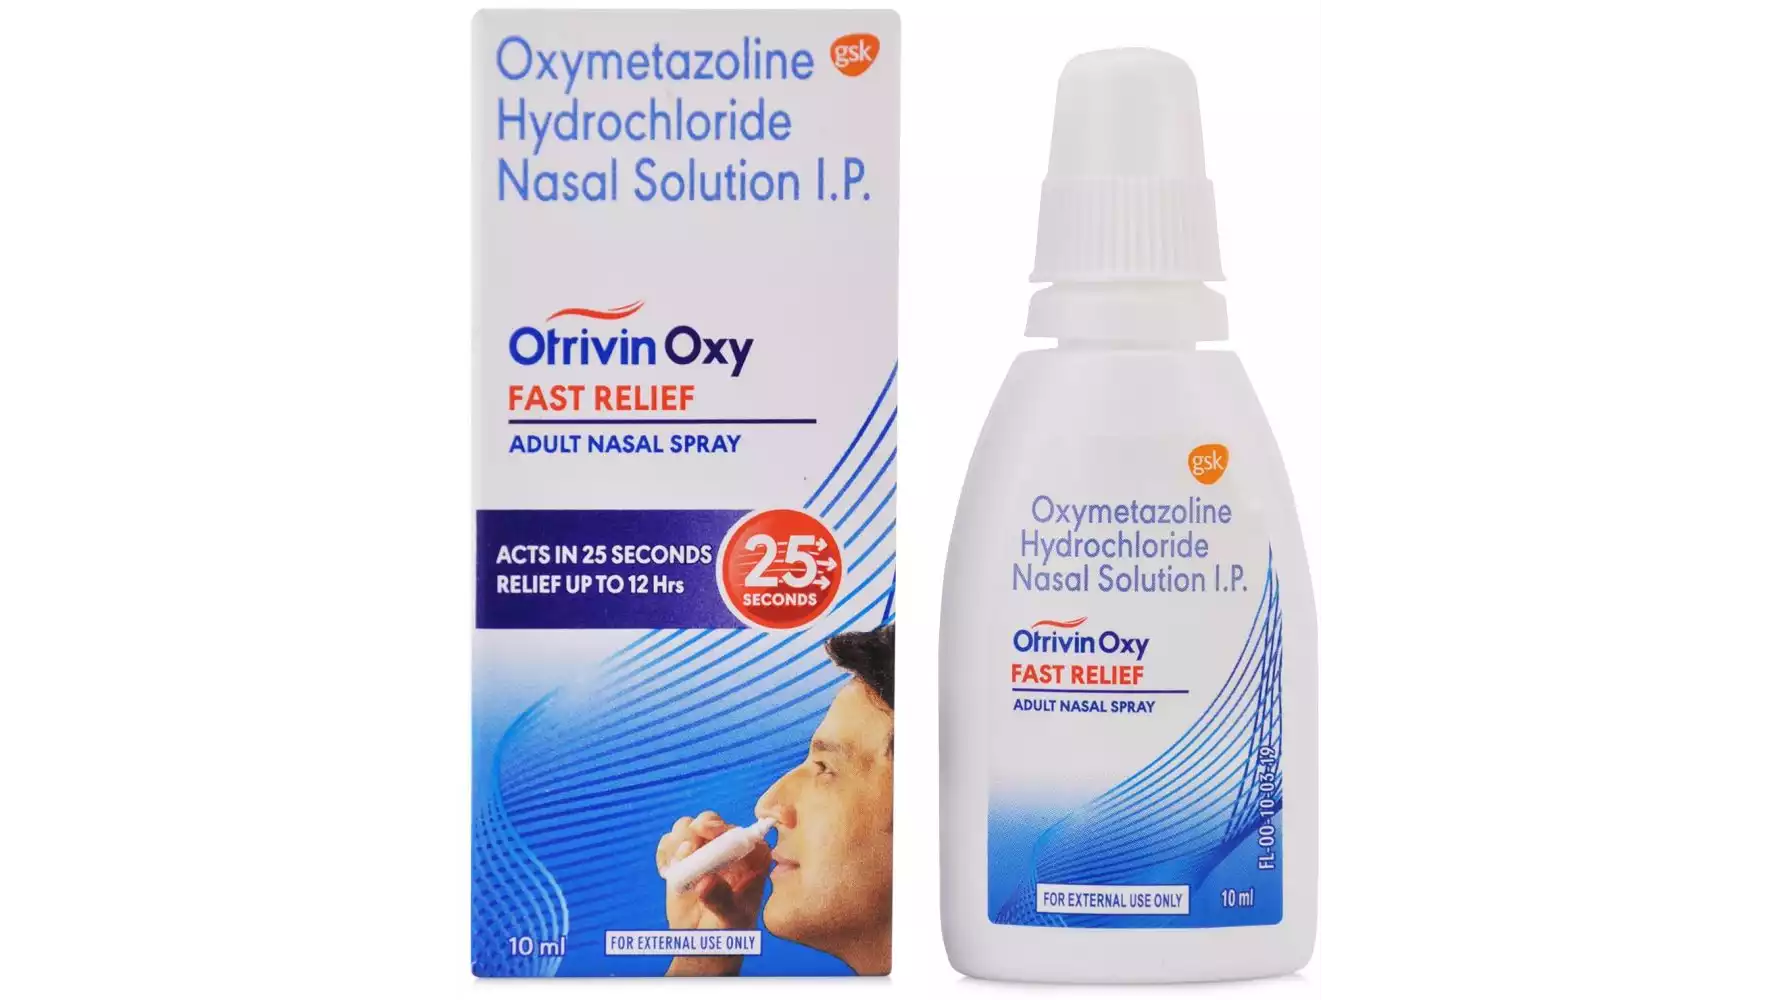 Otrivin Oxy Fast Relief Adult Nasal Spray (10ml)